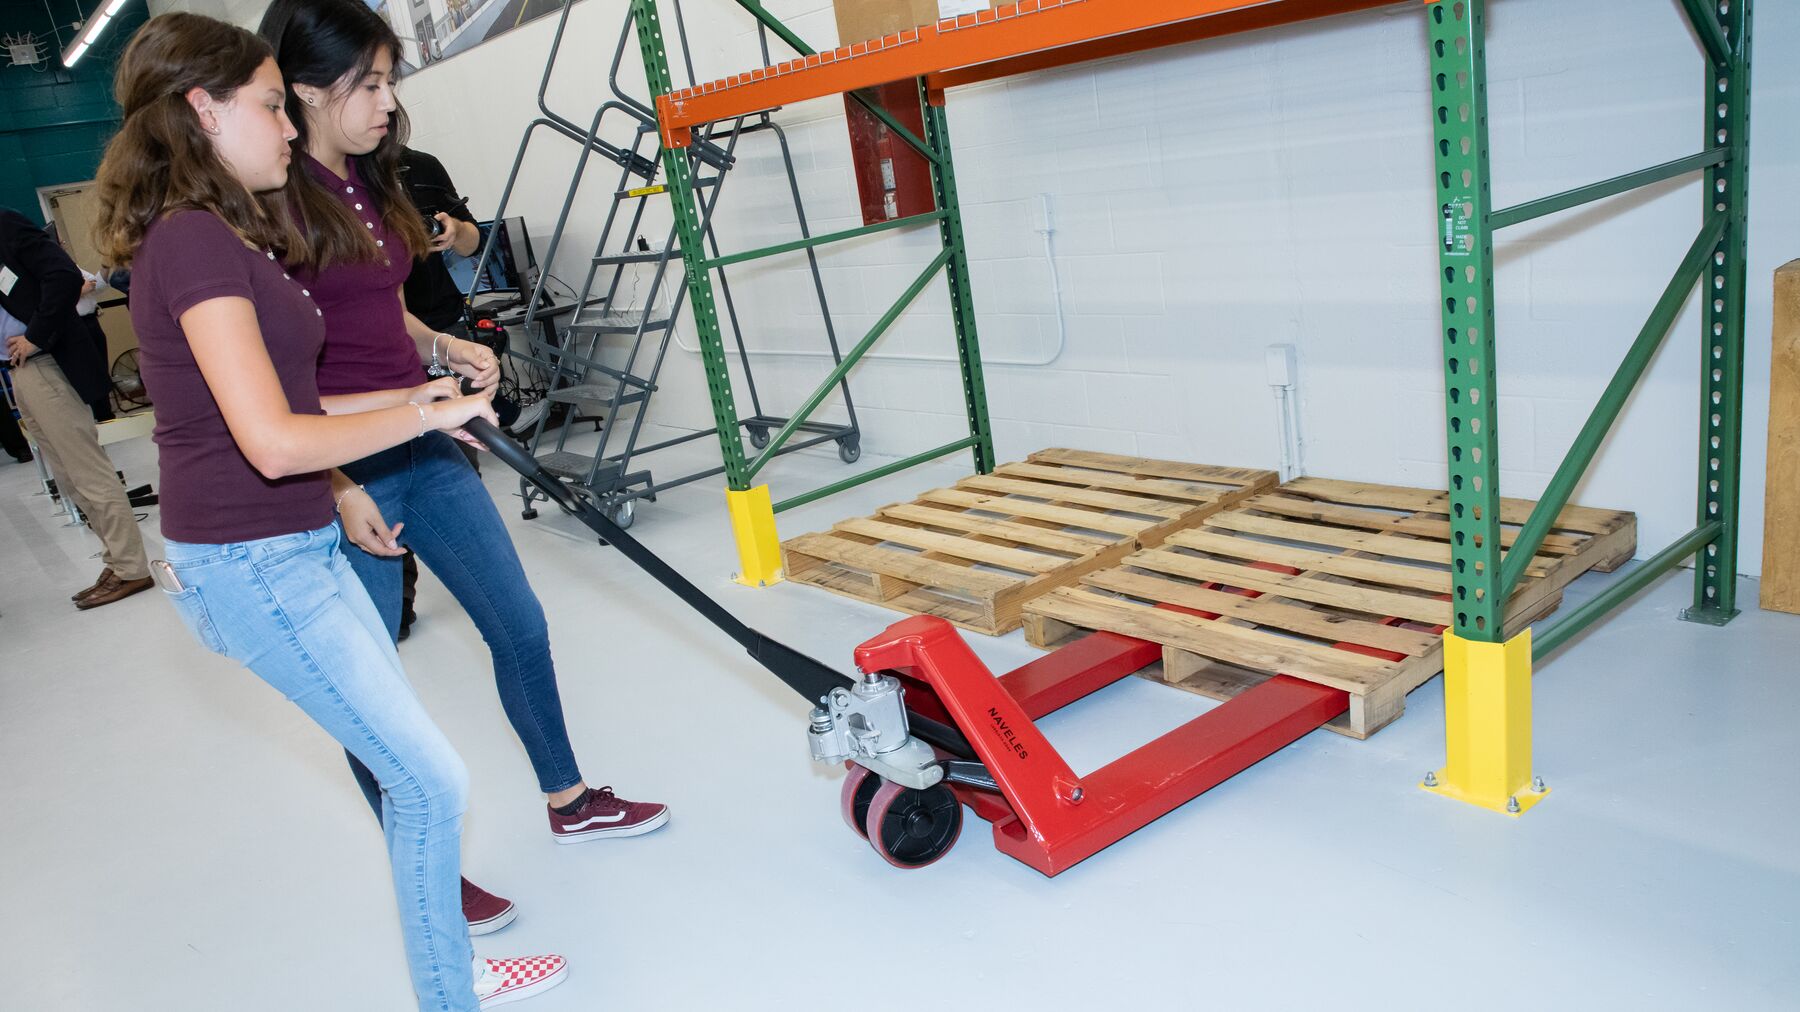 CWI Miami Students Operating a Pallet Jack